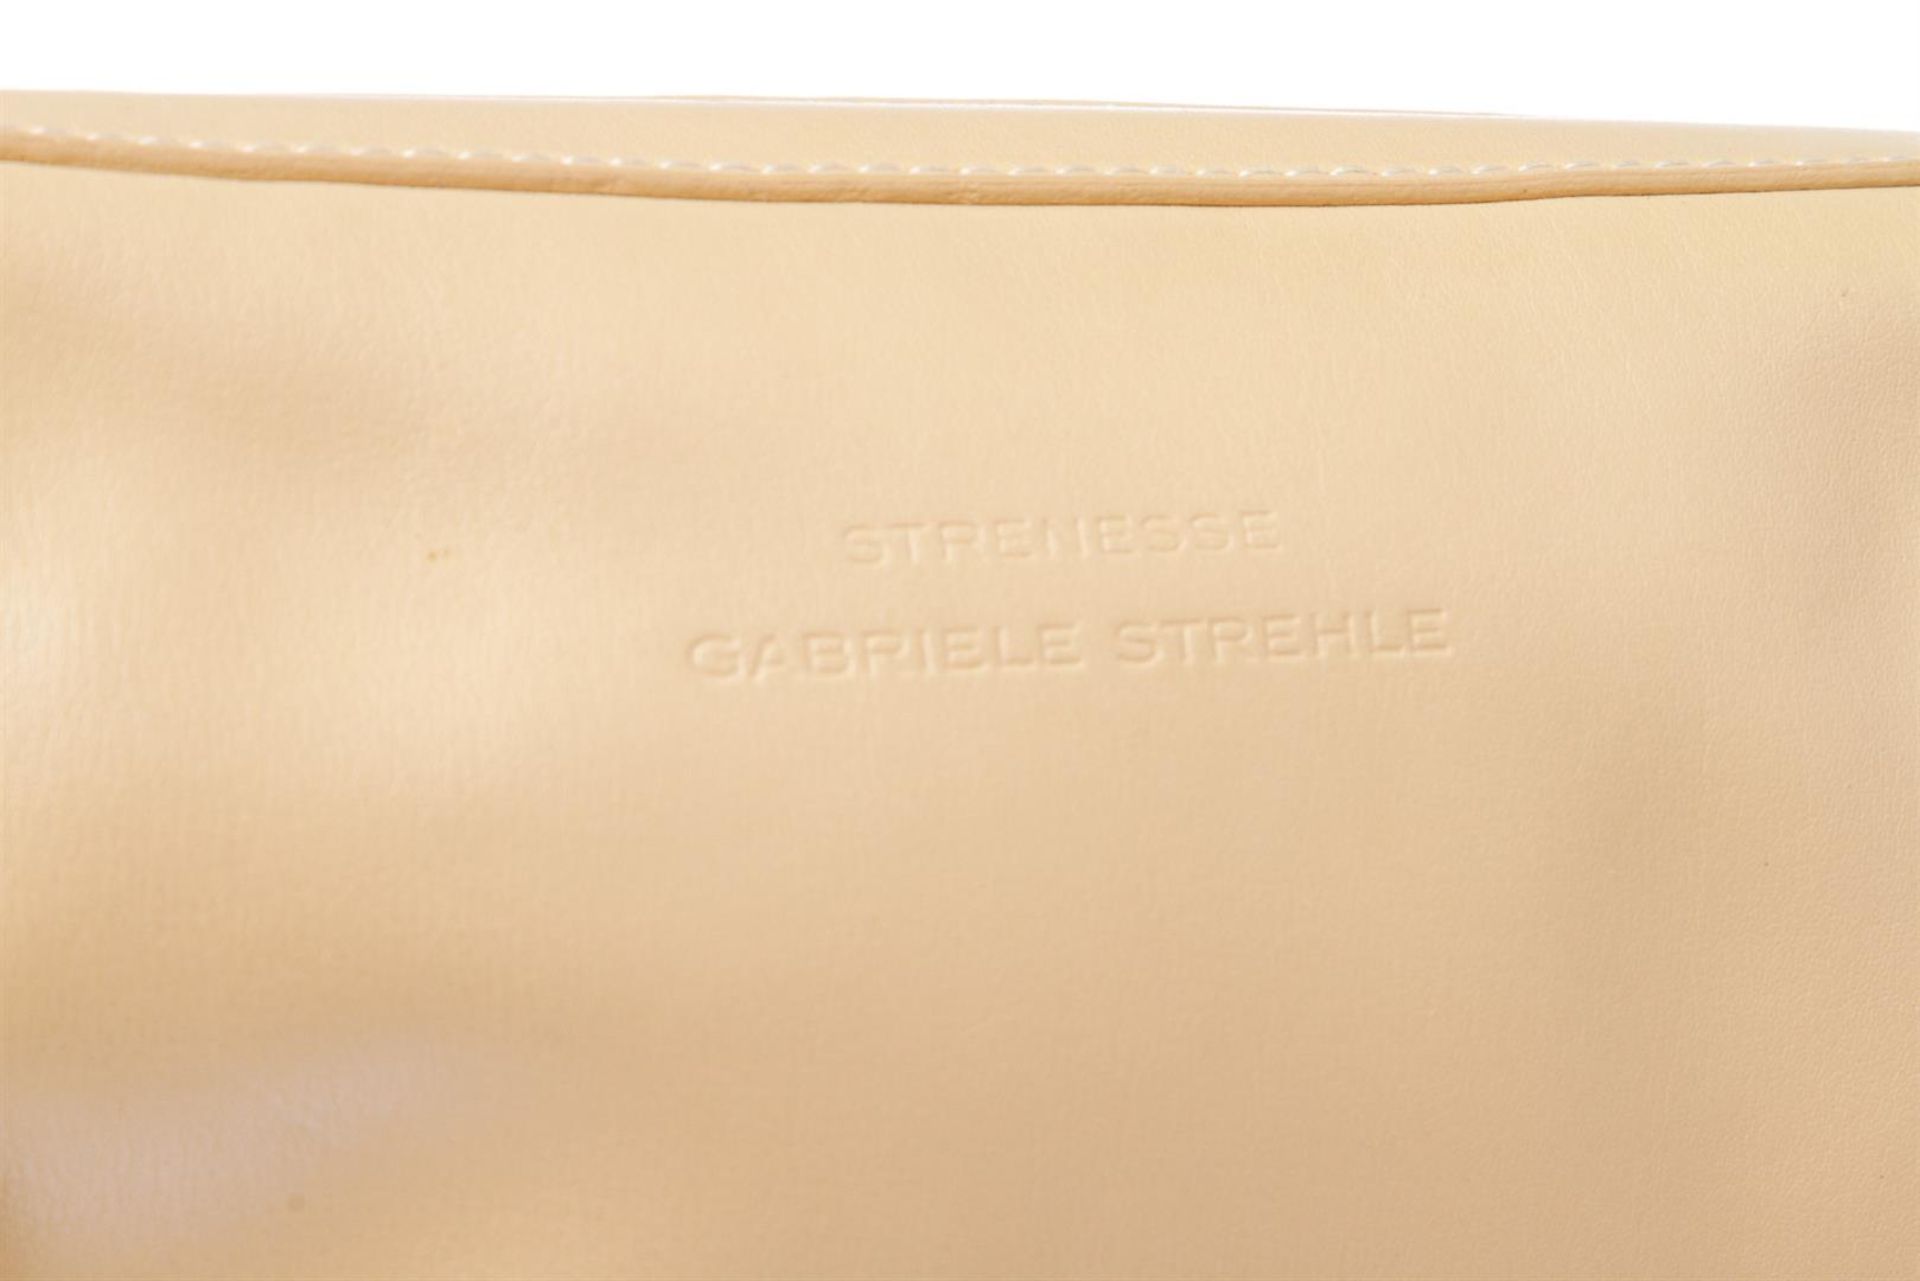 Strenesse Gabriele Strehle Beige Leather Makeup Case - Image 5 of 7